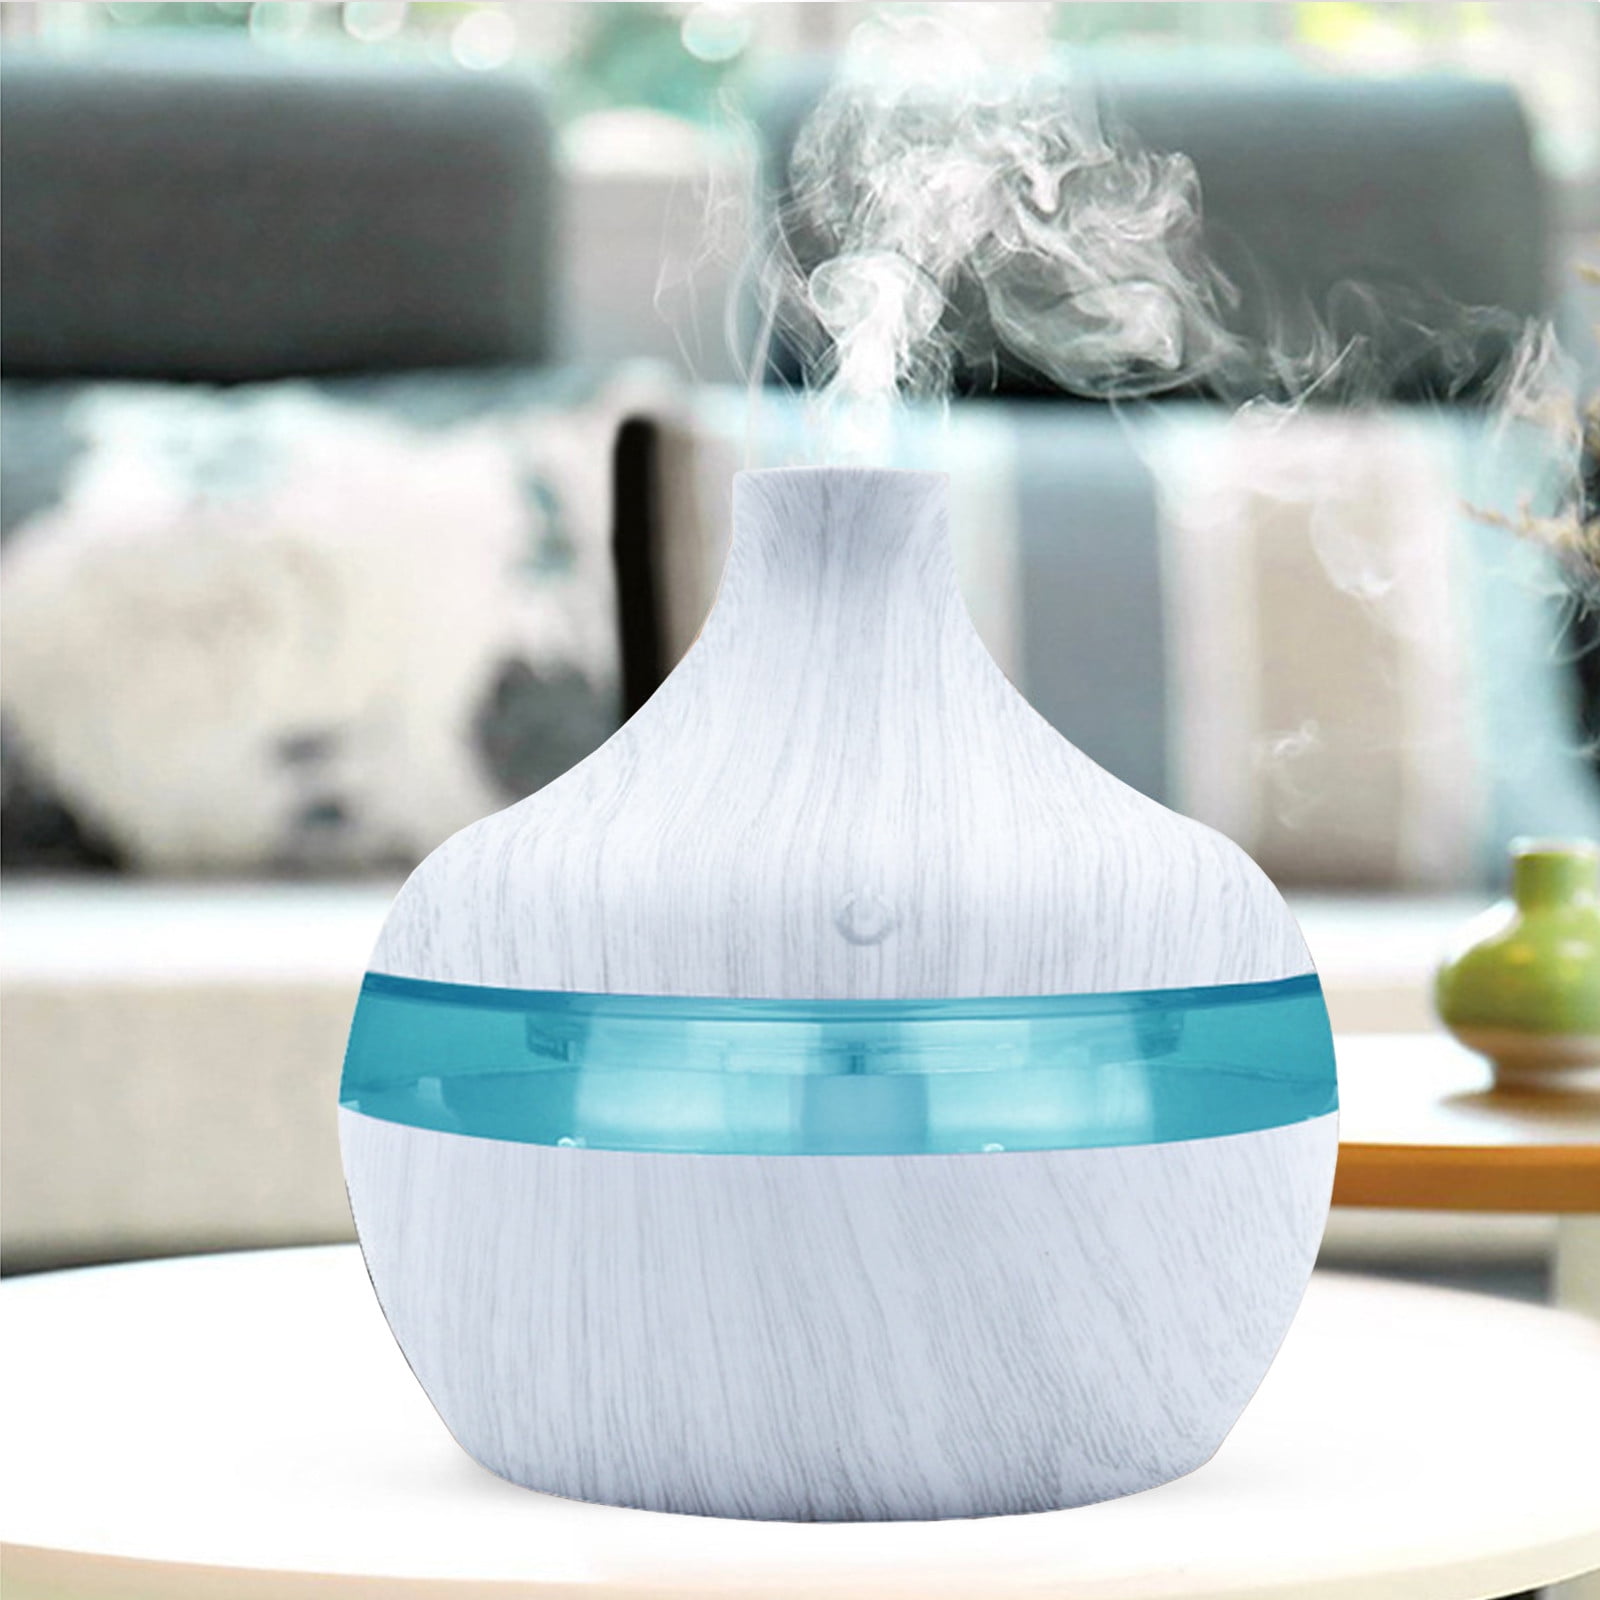 Details about   Essential Oils for Diffuser Aromatherapy Oil Humidifier 